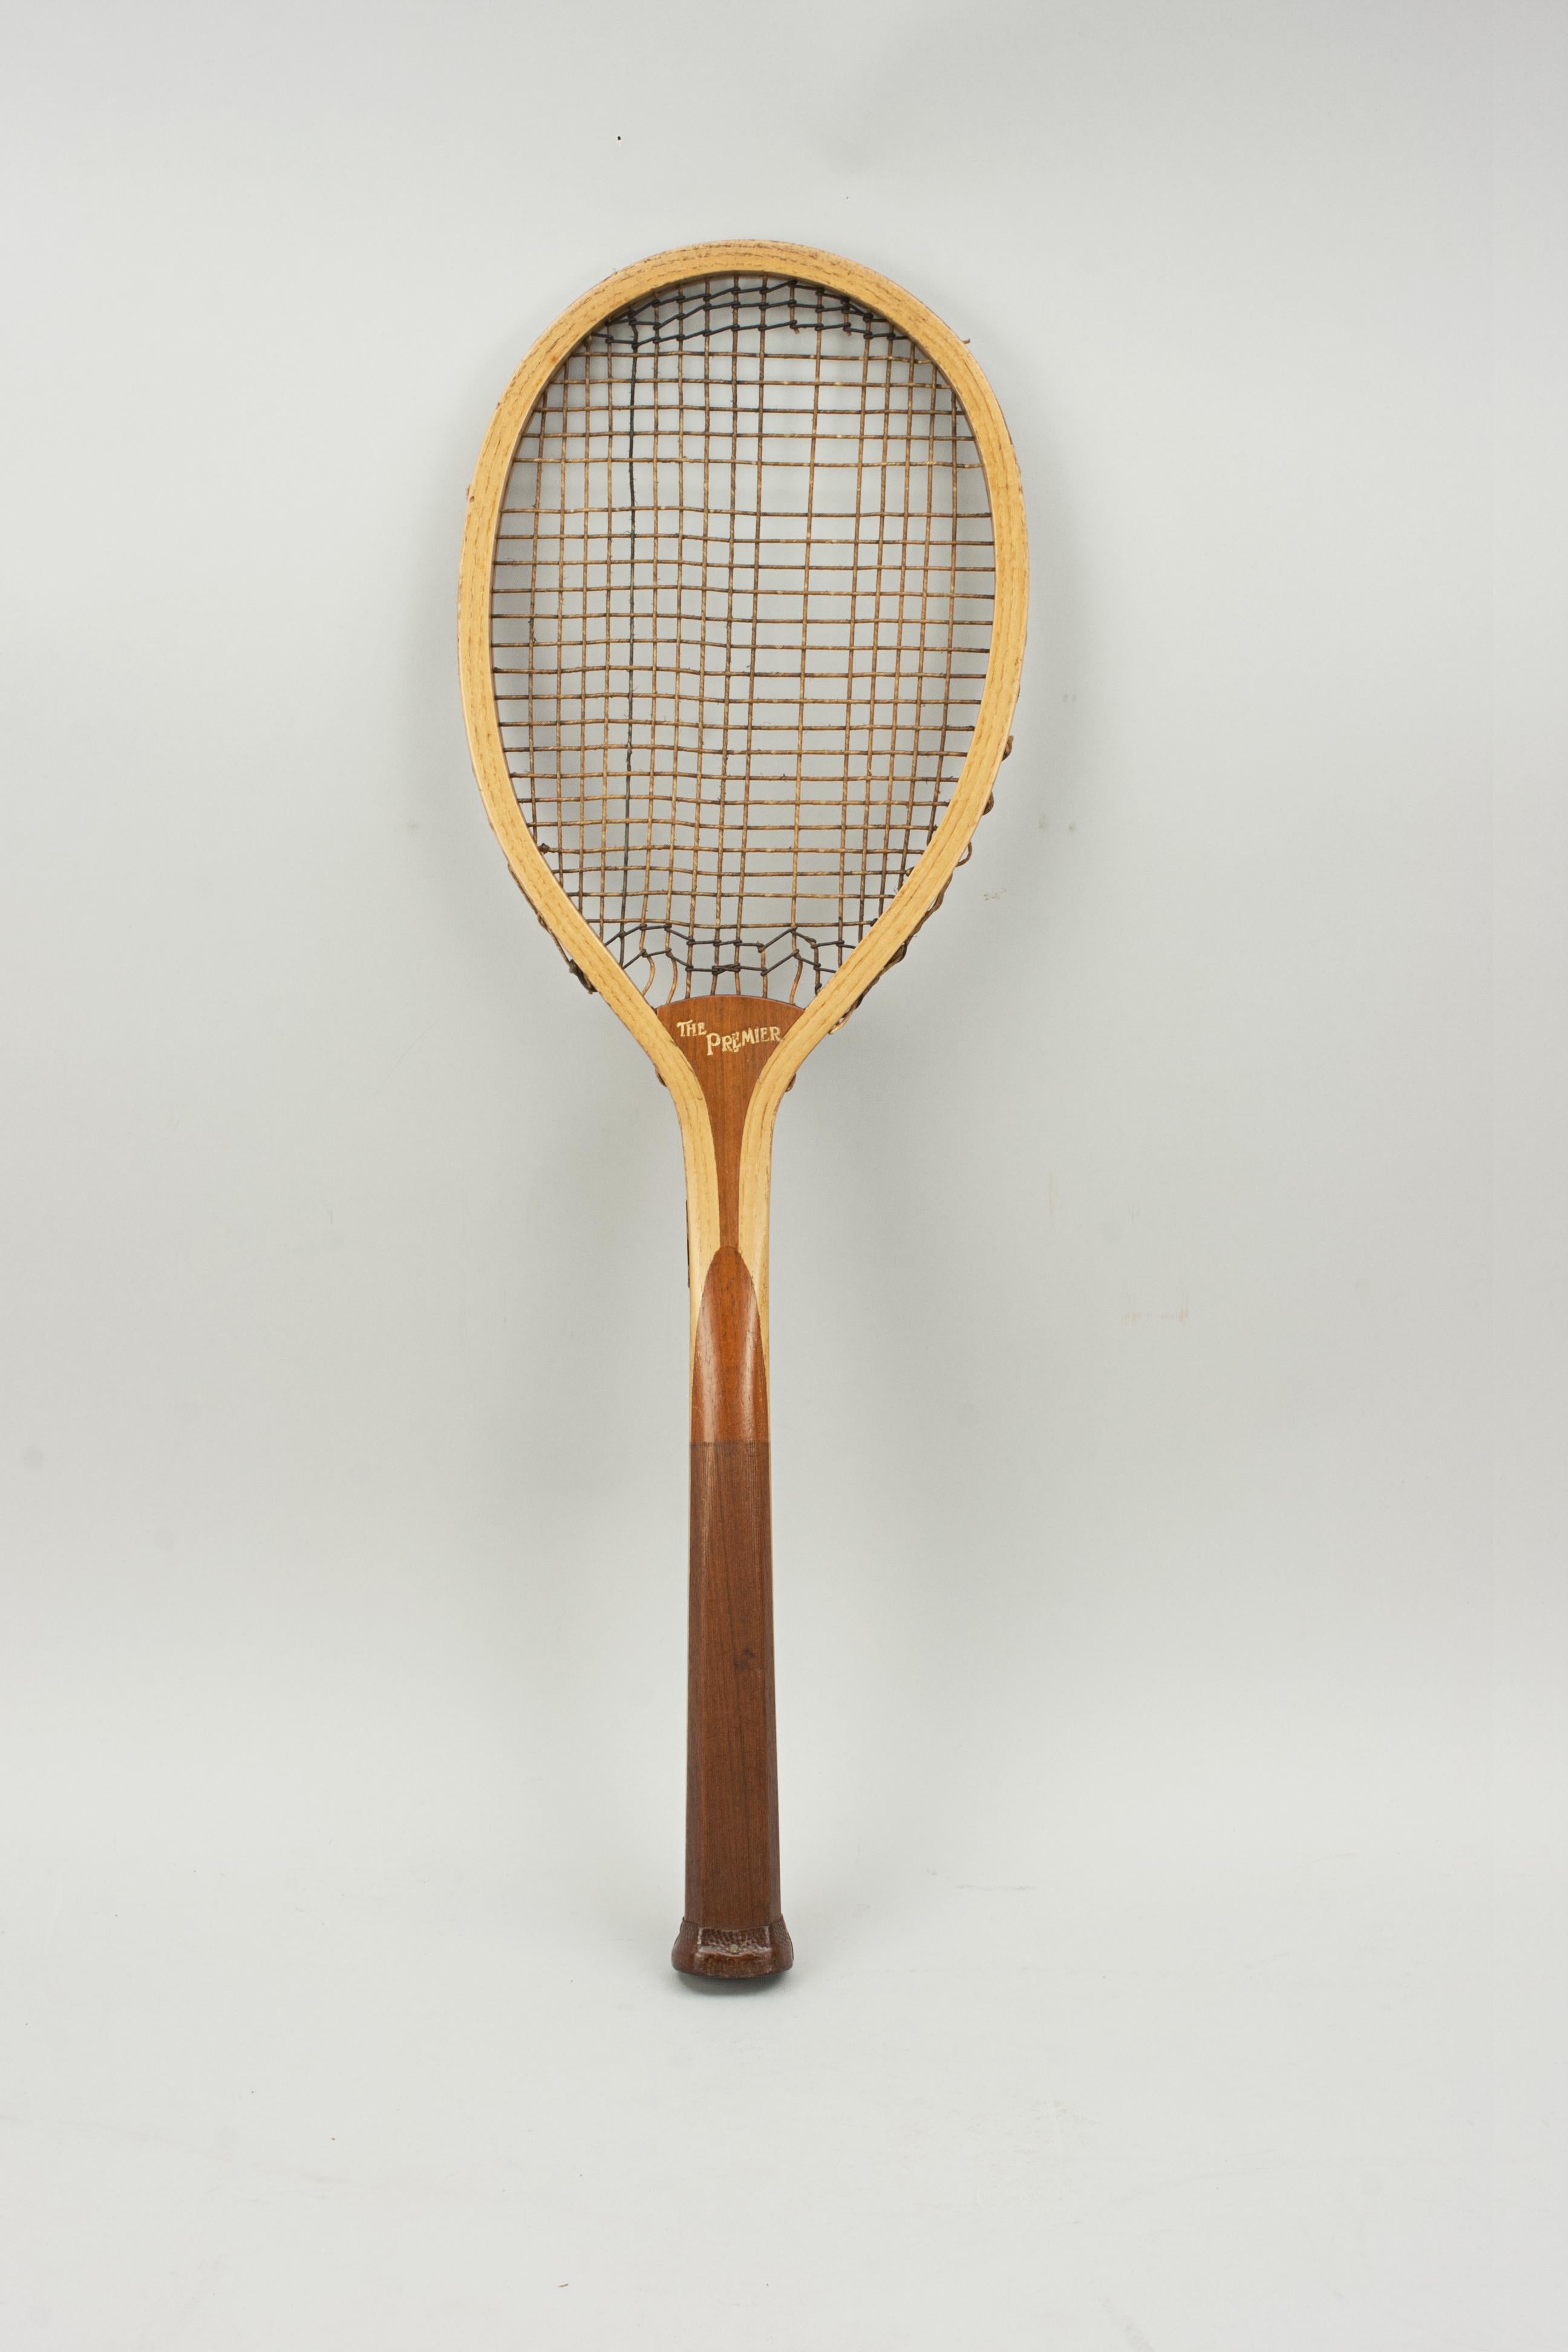 Imported lawn tennis racket, Kertész T?dor, Budapest.
A wooden lawn tennis racket 'The Premier'. A nice ash framed racket with convex wedge. The walnut wedge is embossed 'The Premier' on one side and 'Imported by Kertész T?dor, Budapest' on the